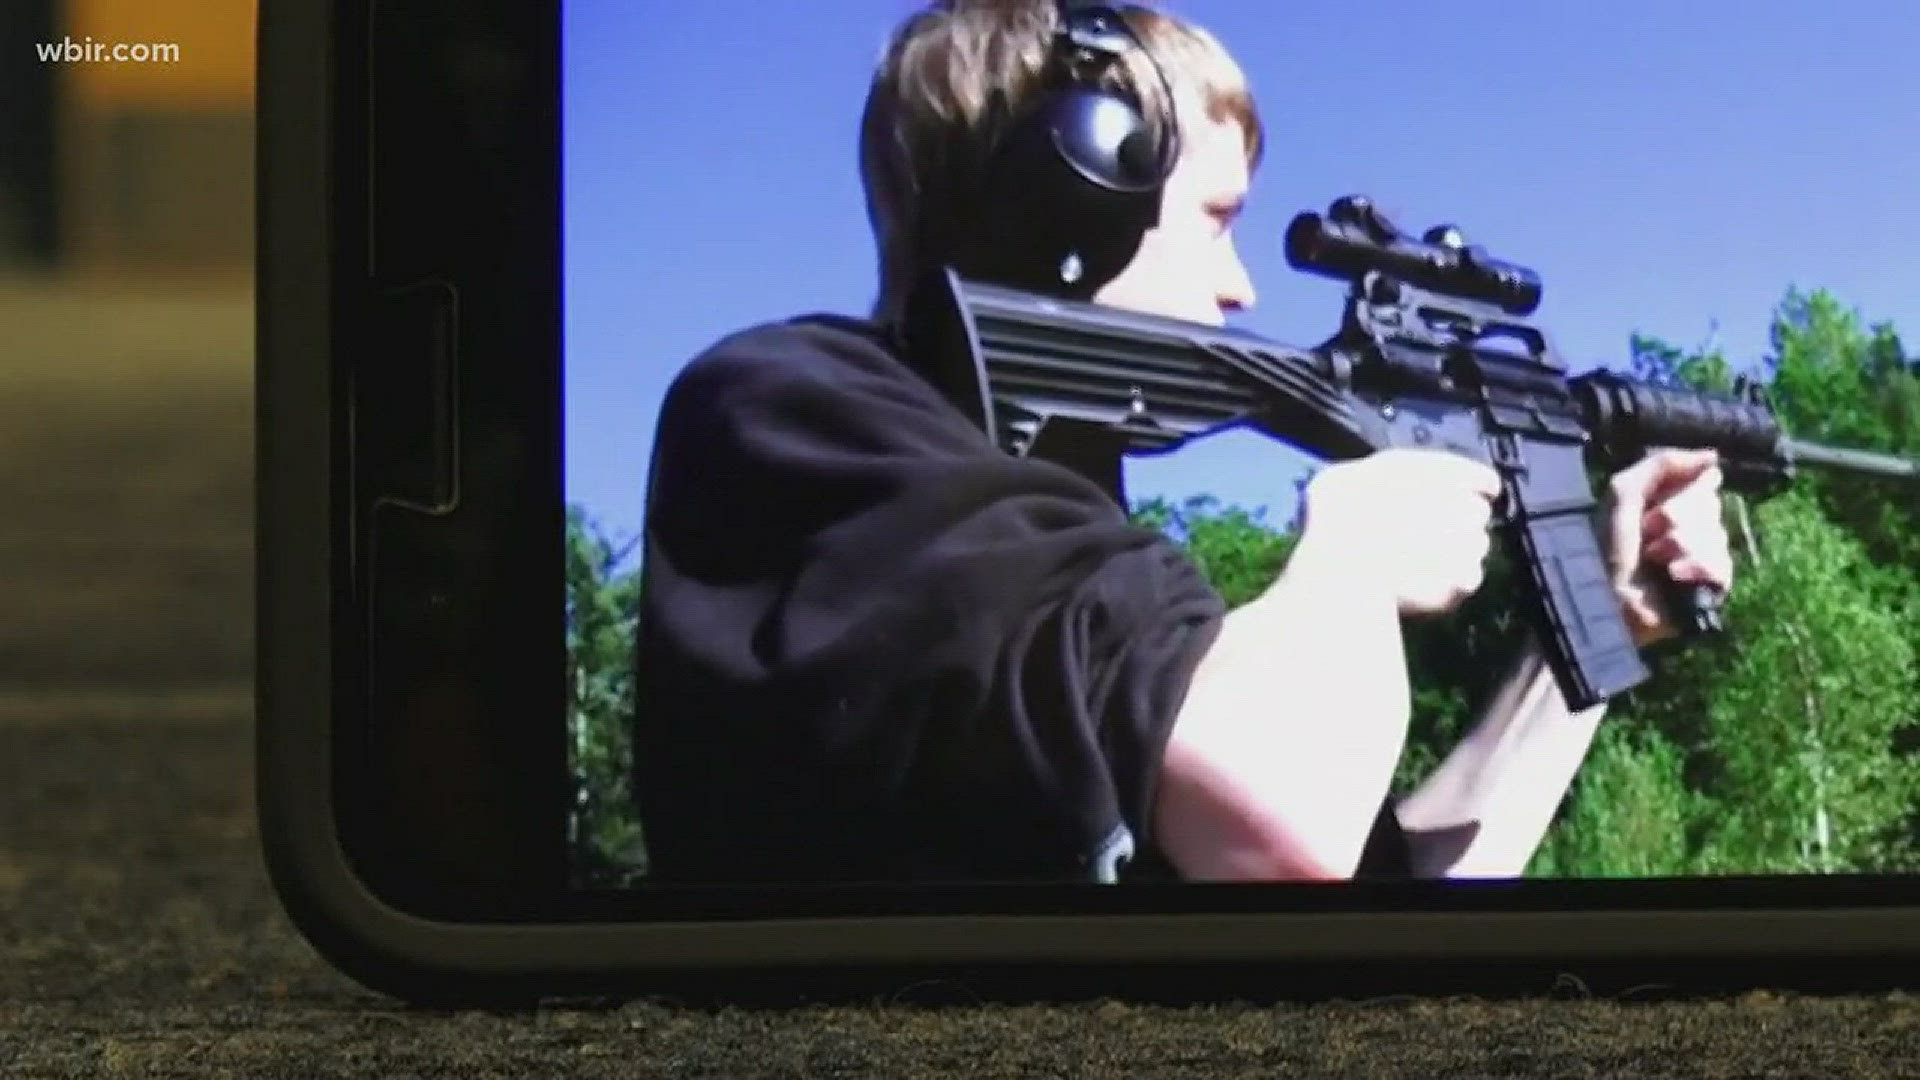 Gov. Haslam suggests raising the age to purchase assault rifles.